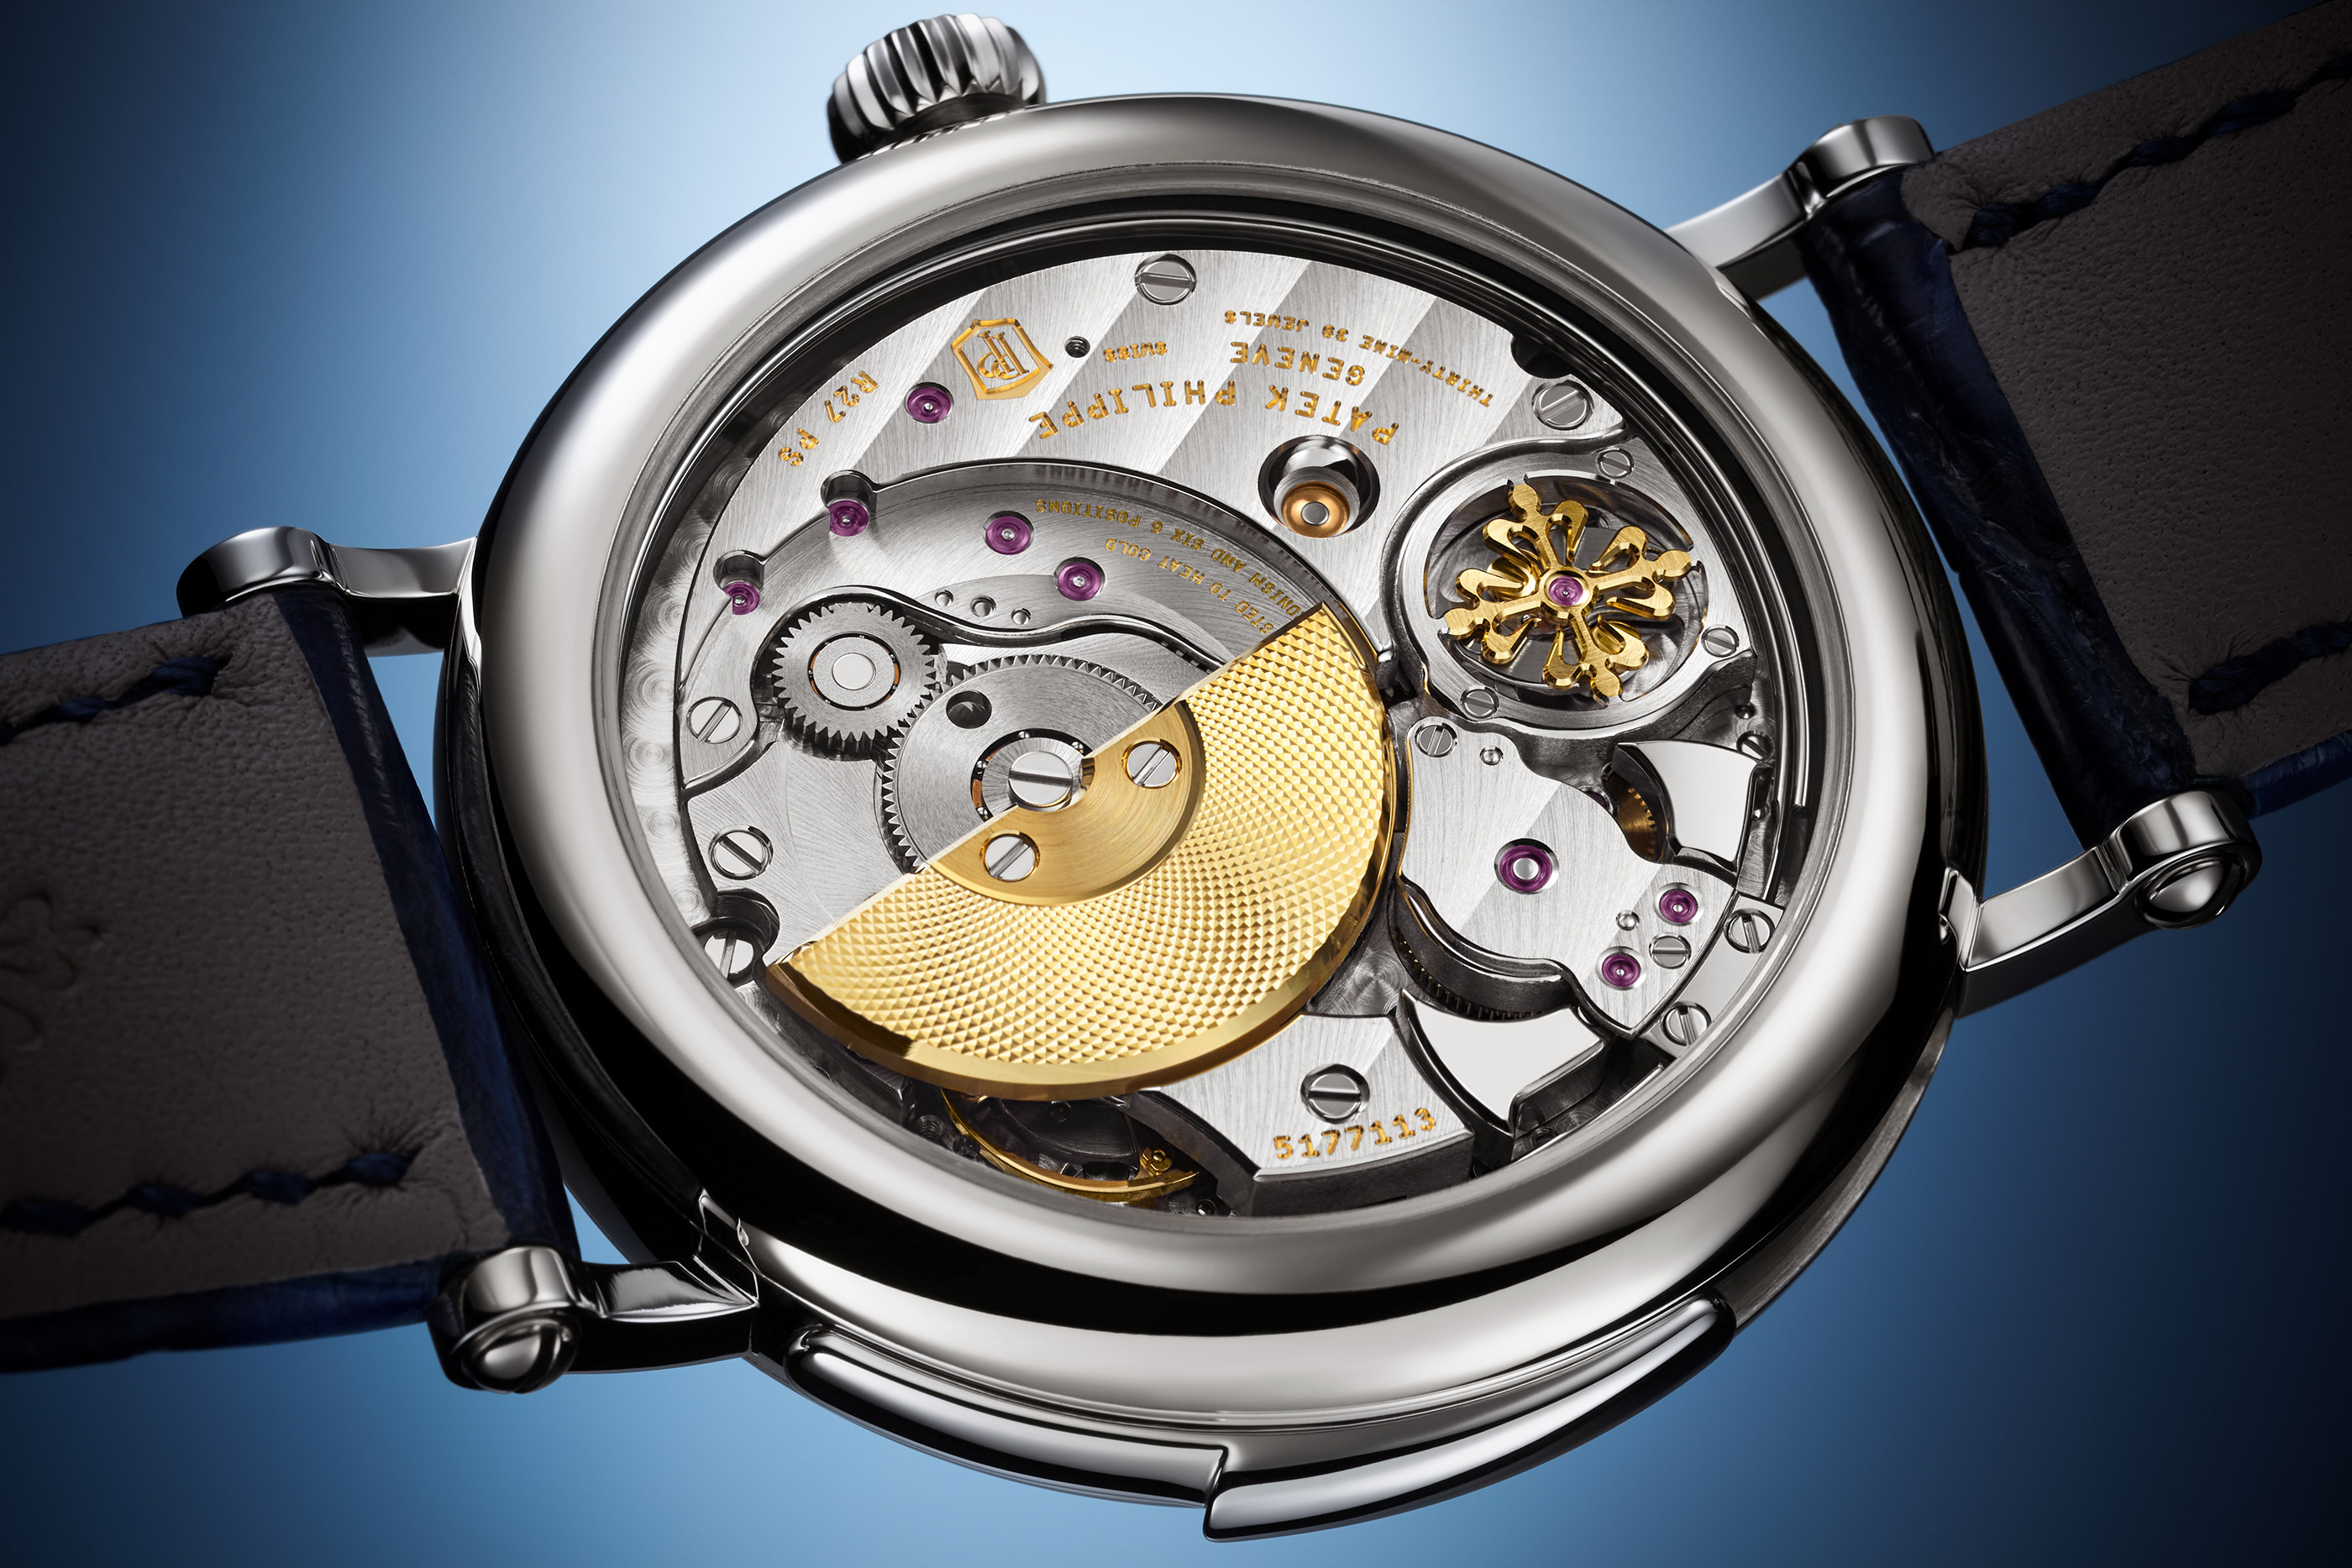 GRAND COMPLICATIONS SELF-WINDING - MINUTE REPEATER